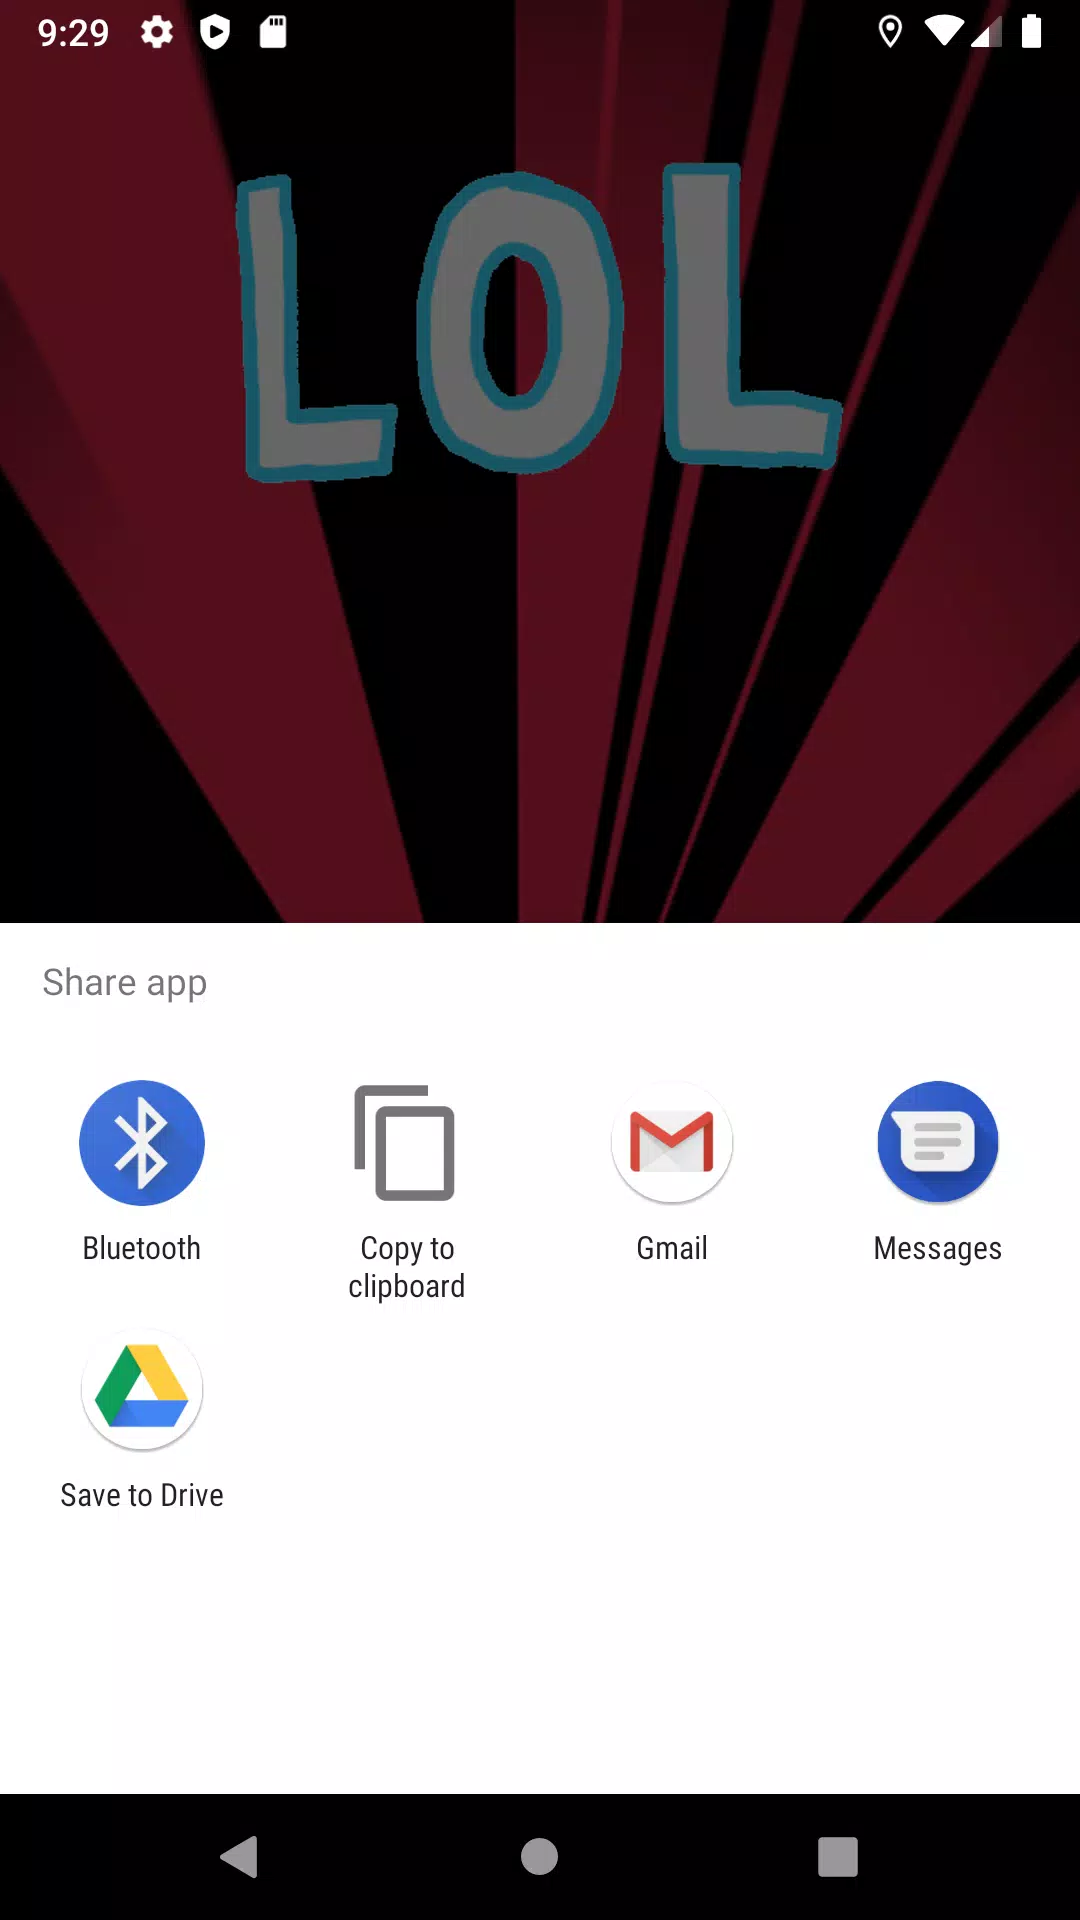 Lol Meme Sound Button for Android - Free App Download